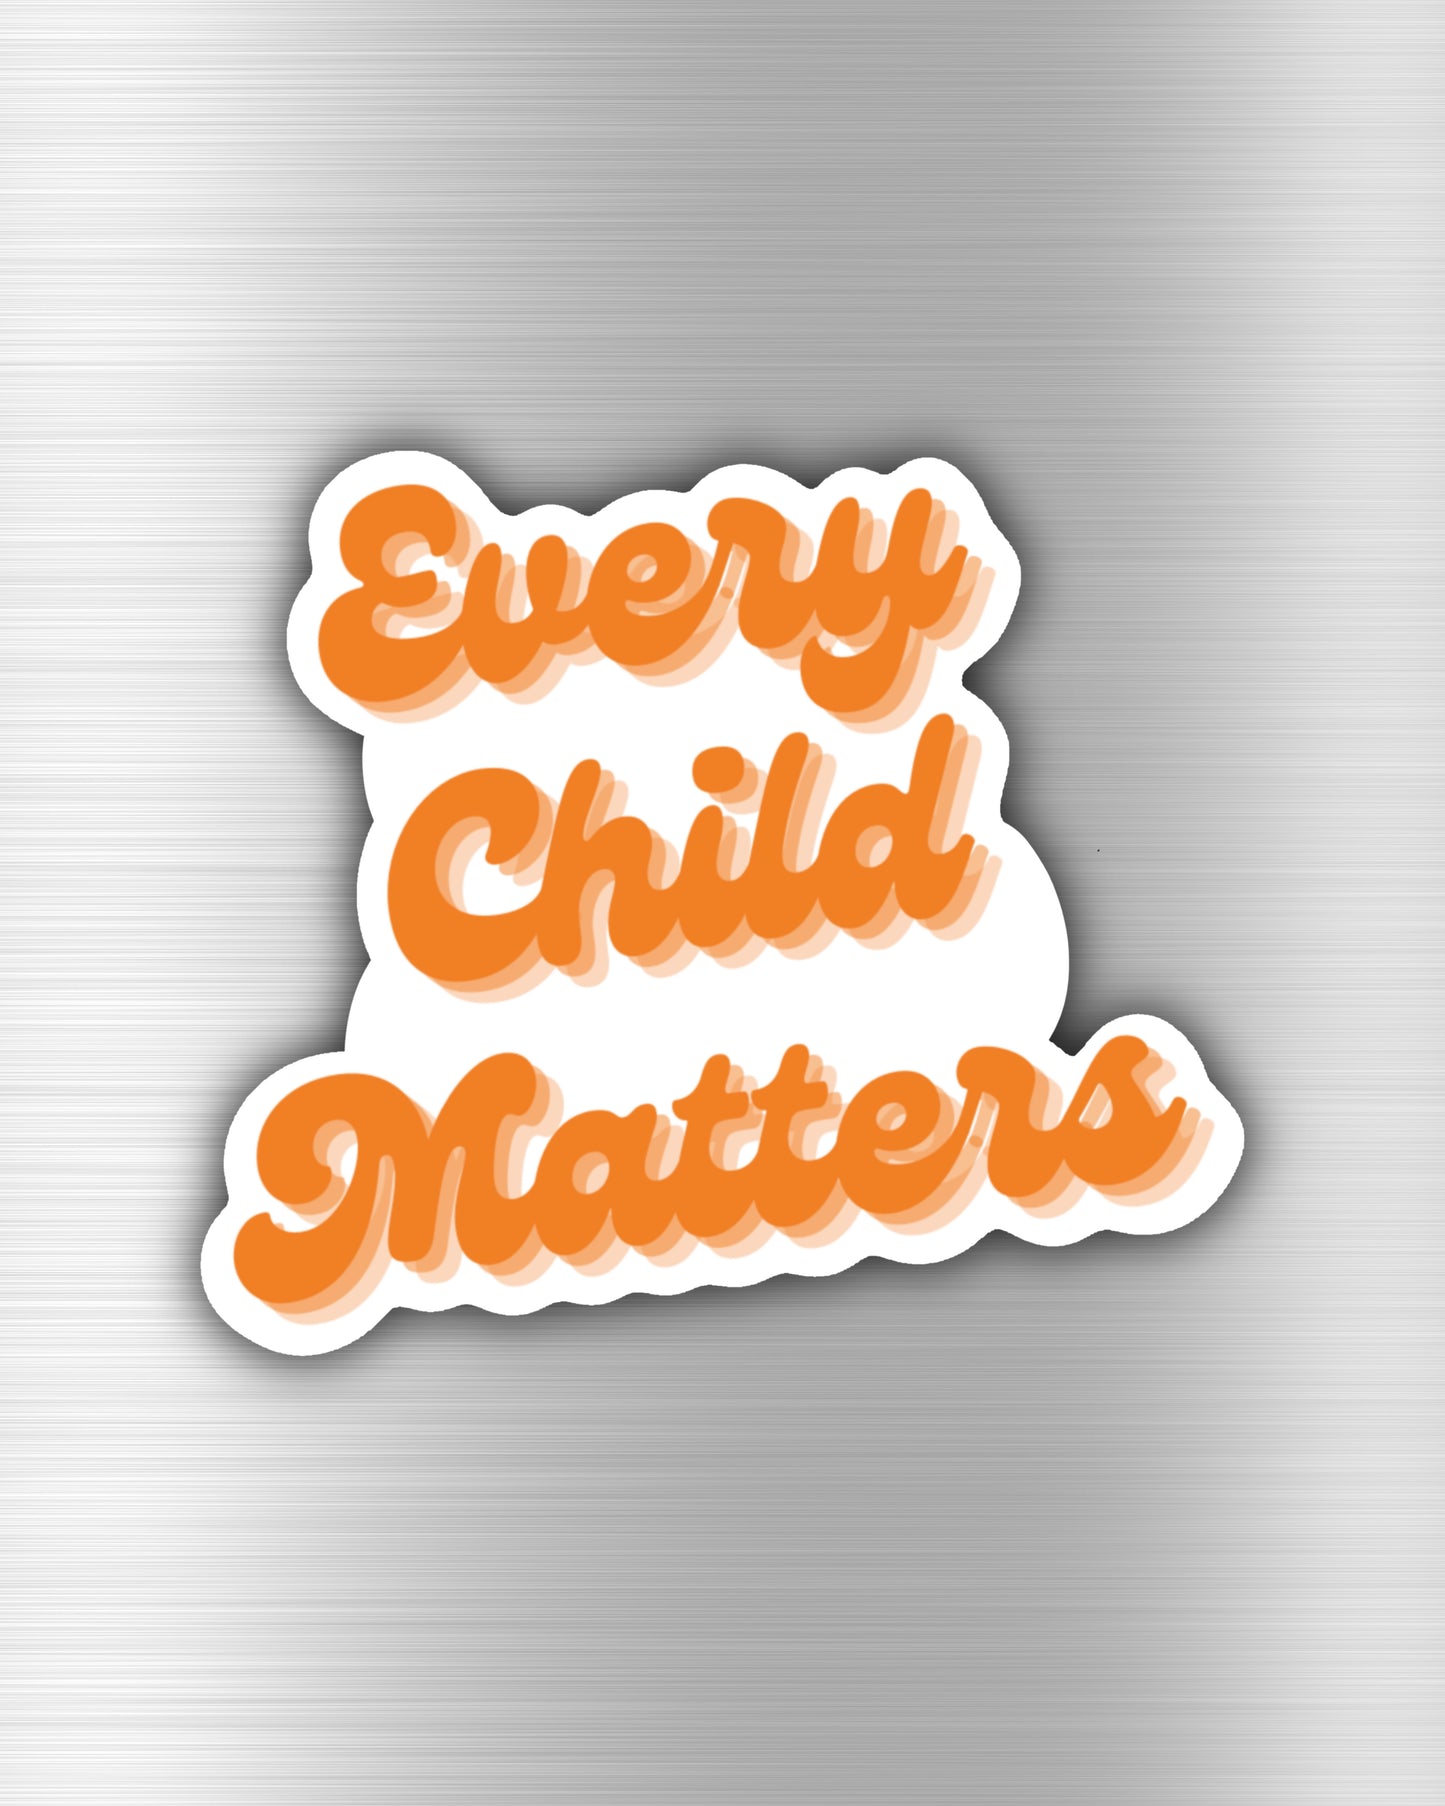 Every Child Matters Text Magnet